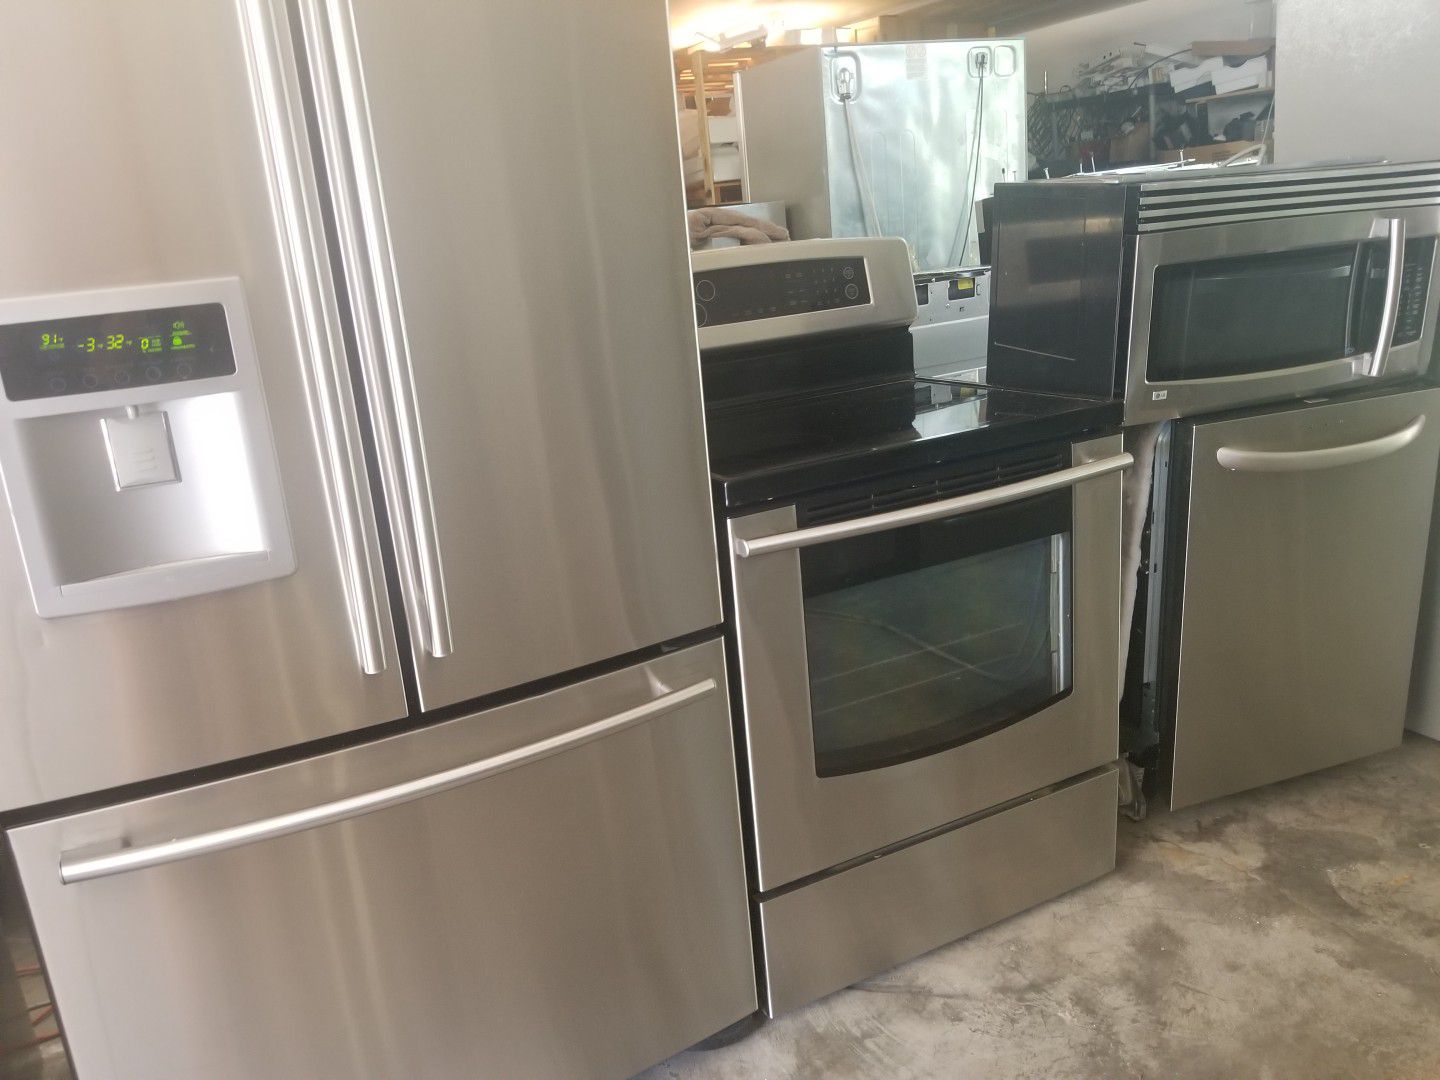 LG stainless steel appliances